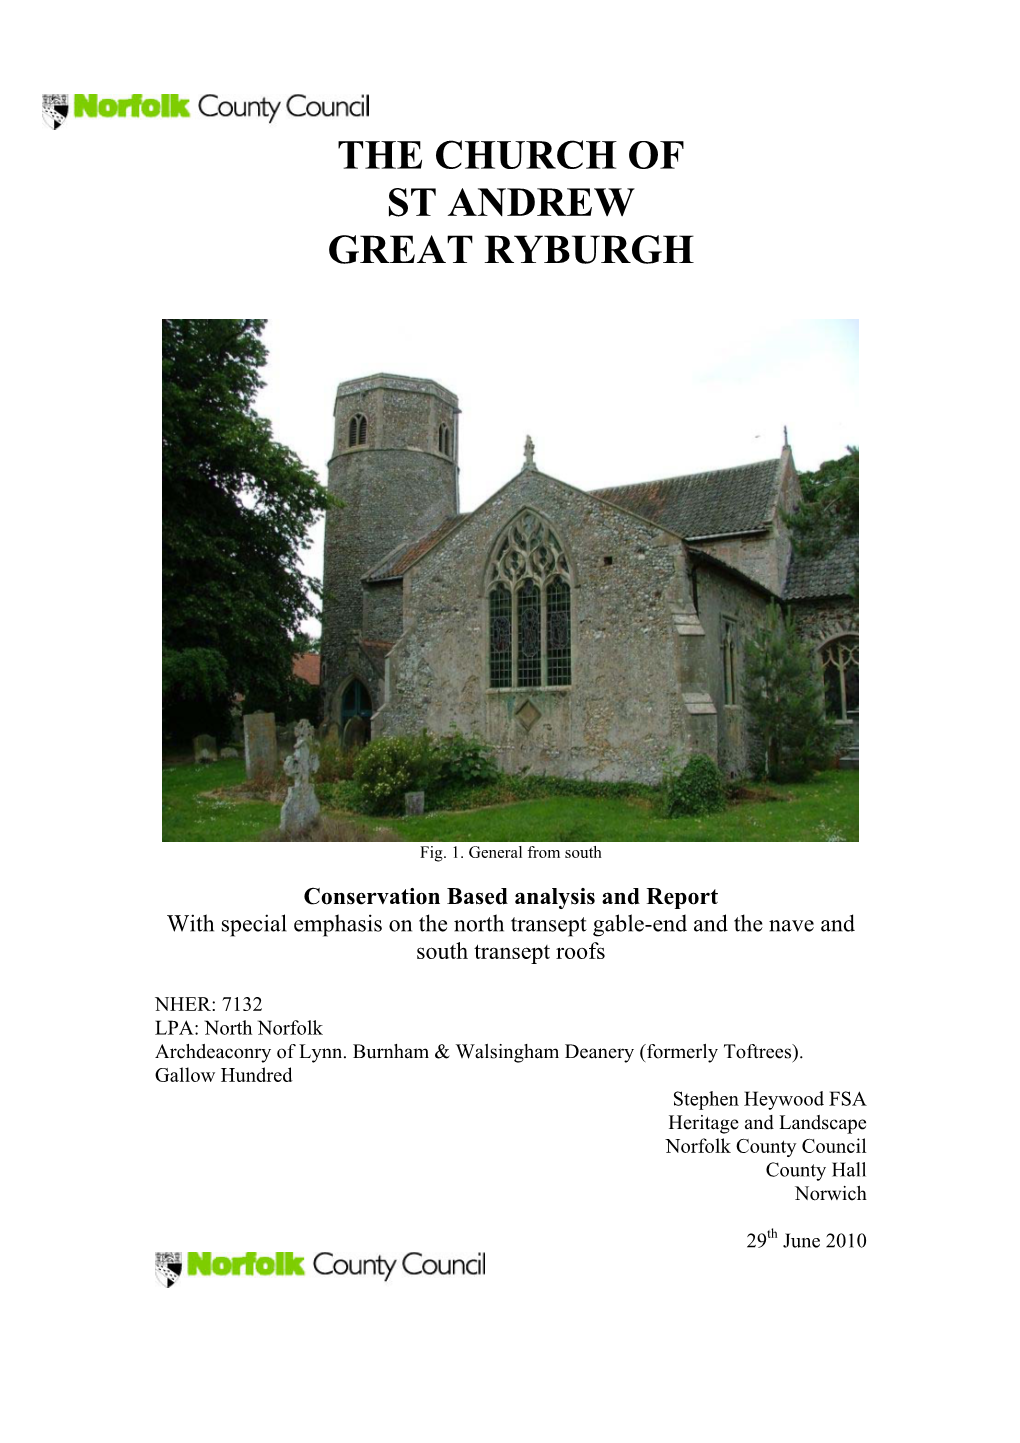 The Church of St Andrew Great Ryburgh